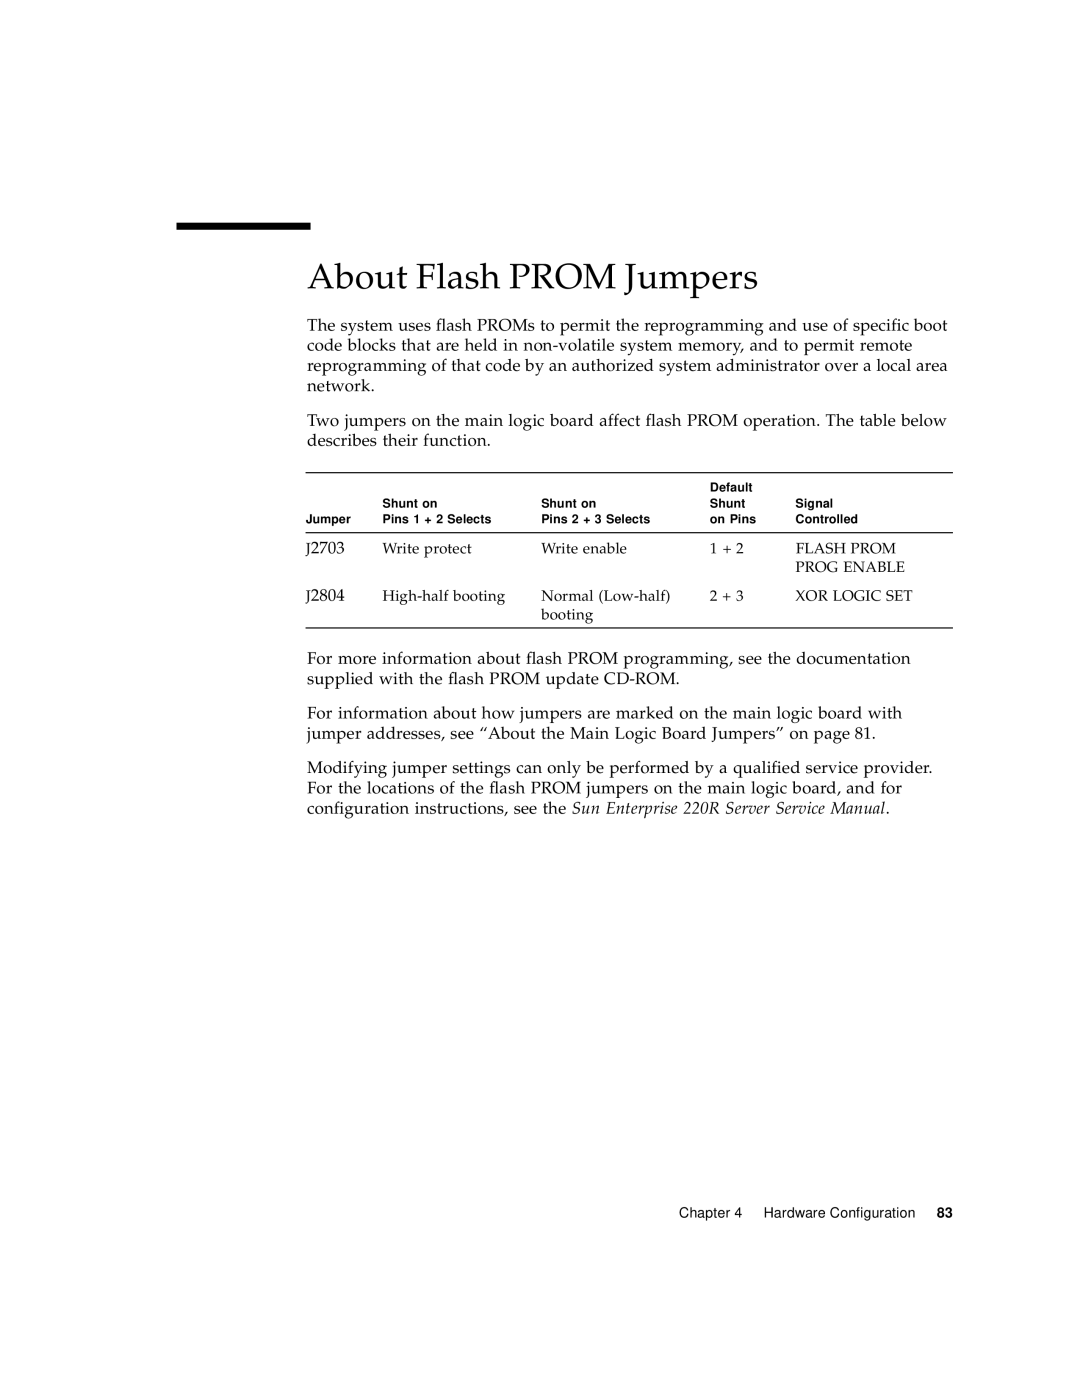 Sun Microsystems 220R manual About Flash PROM Jumpers 